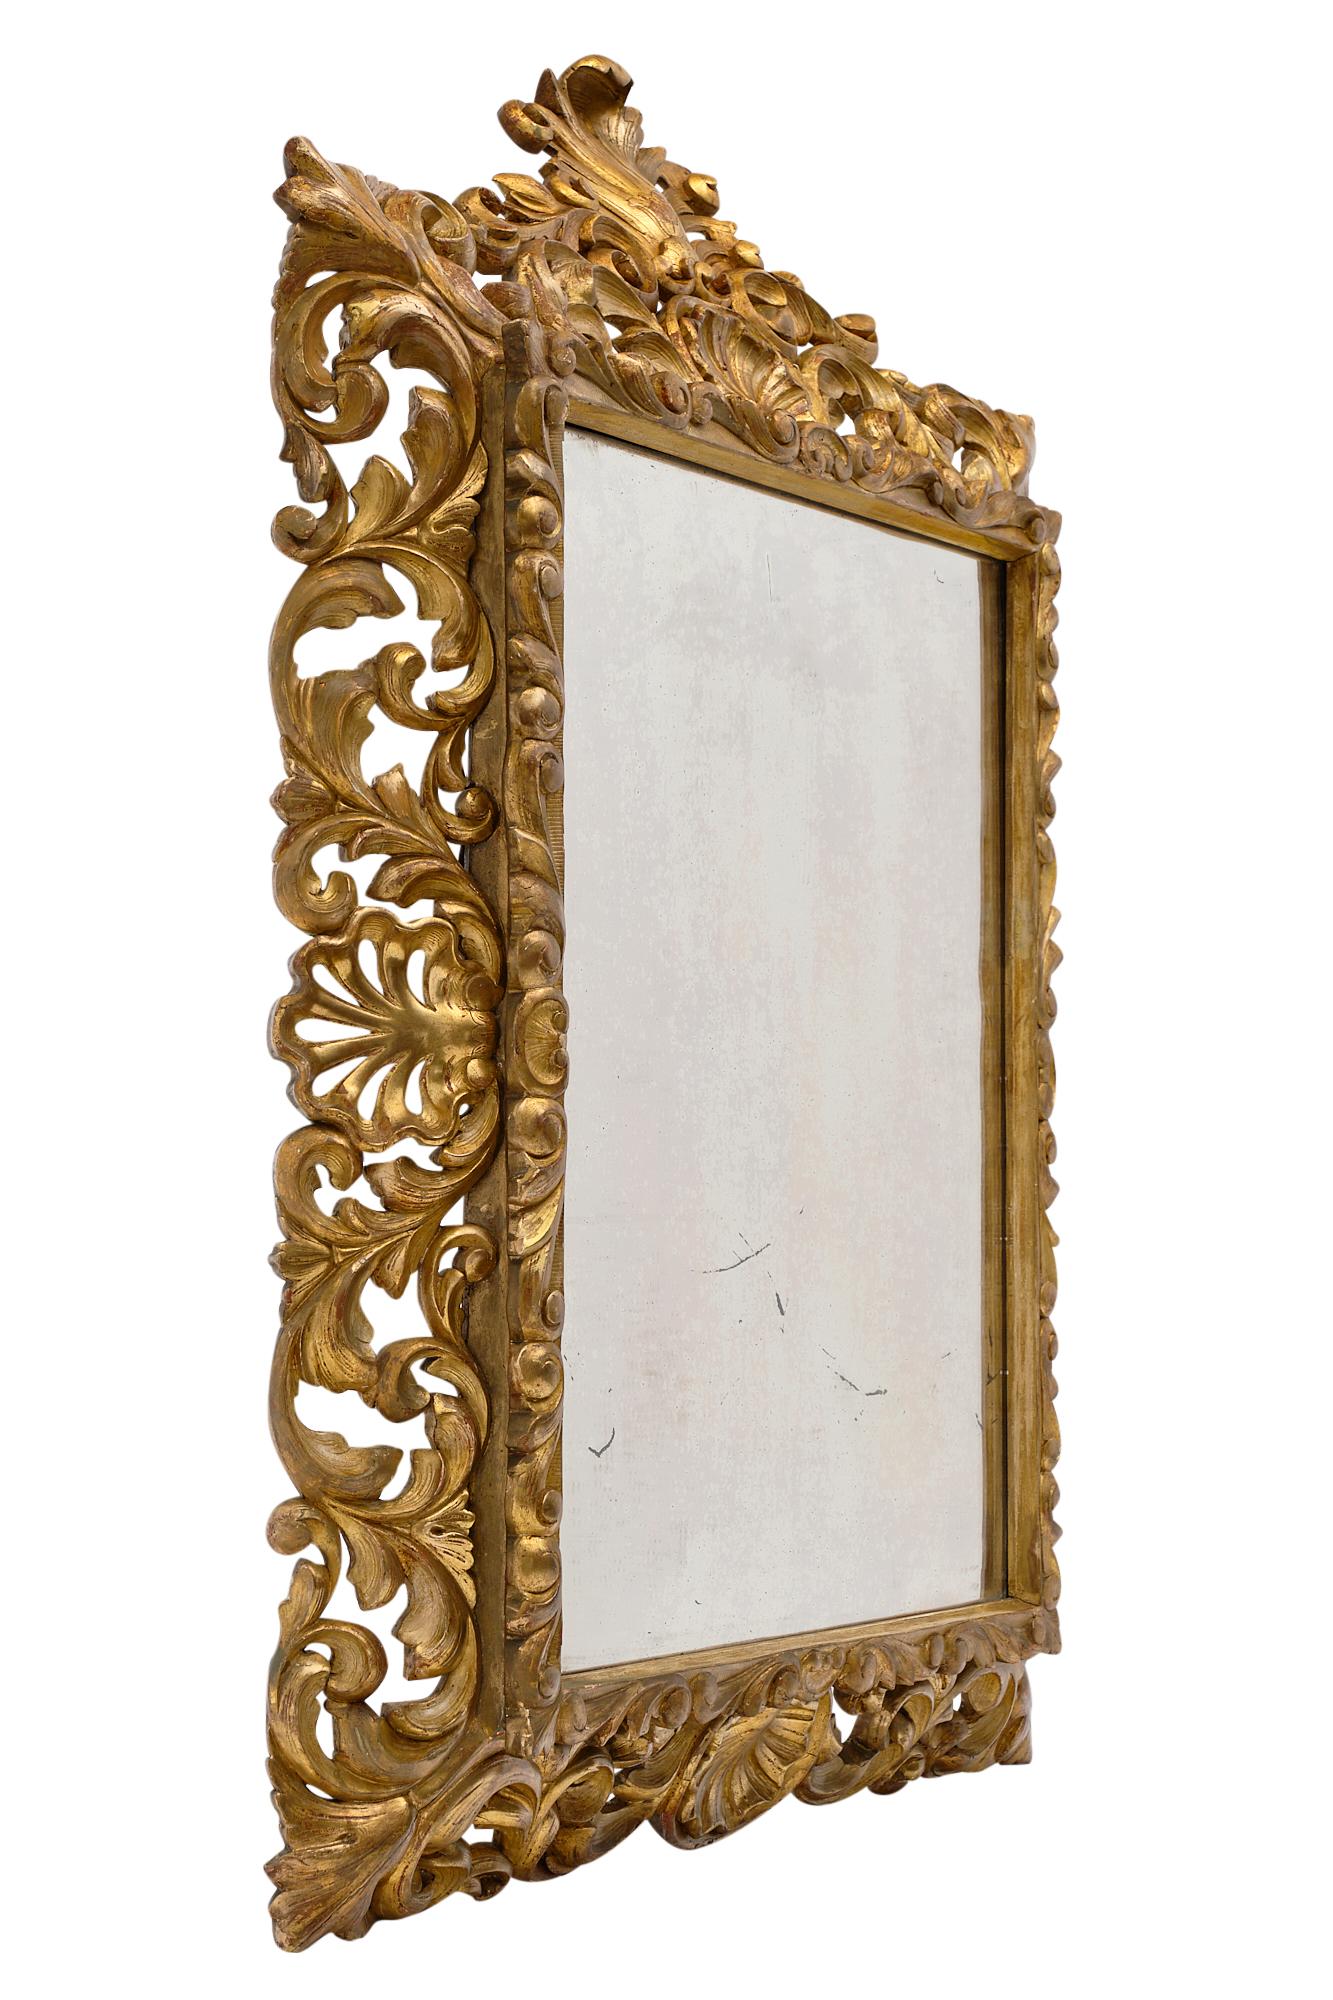 Gold leaf antique French mirror completely hand carved in the Baroque style with stylized acanthus and oak leaves. It has the original 23-carat gold leafing throughout, as well as the original mercury mirror. It is in excellent antique condition and